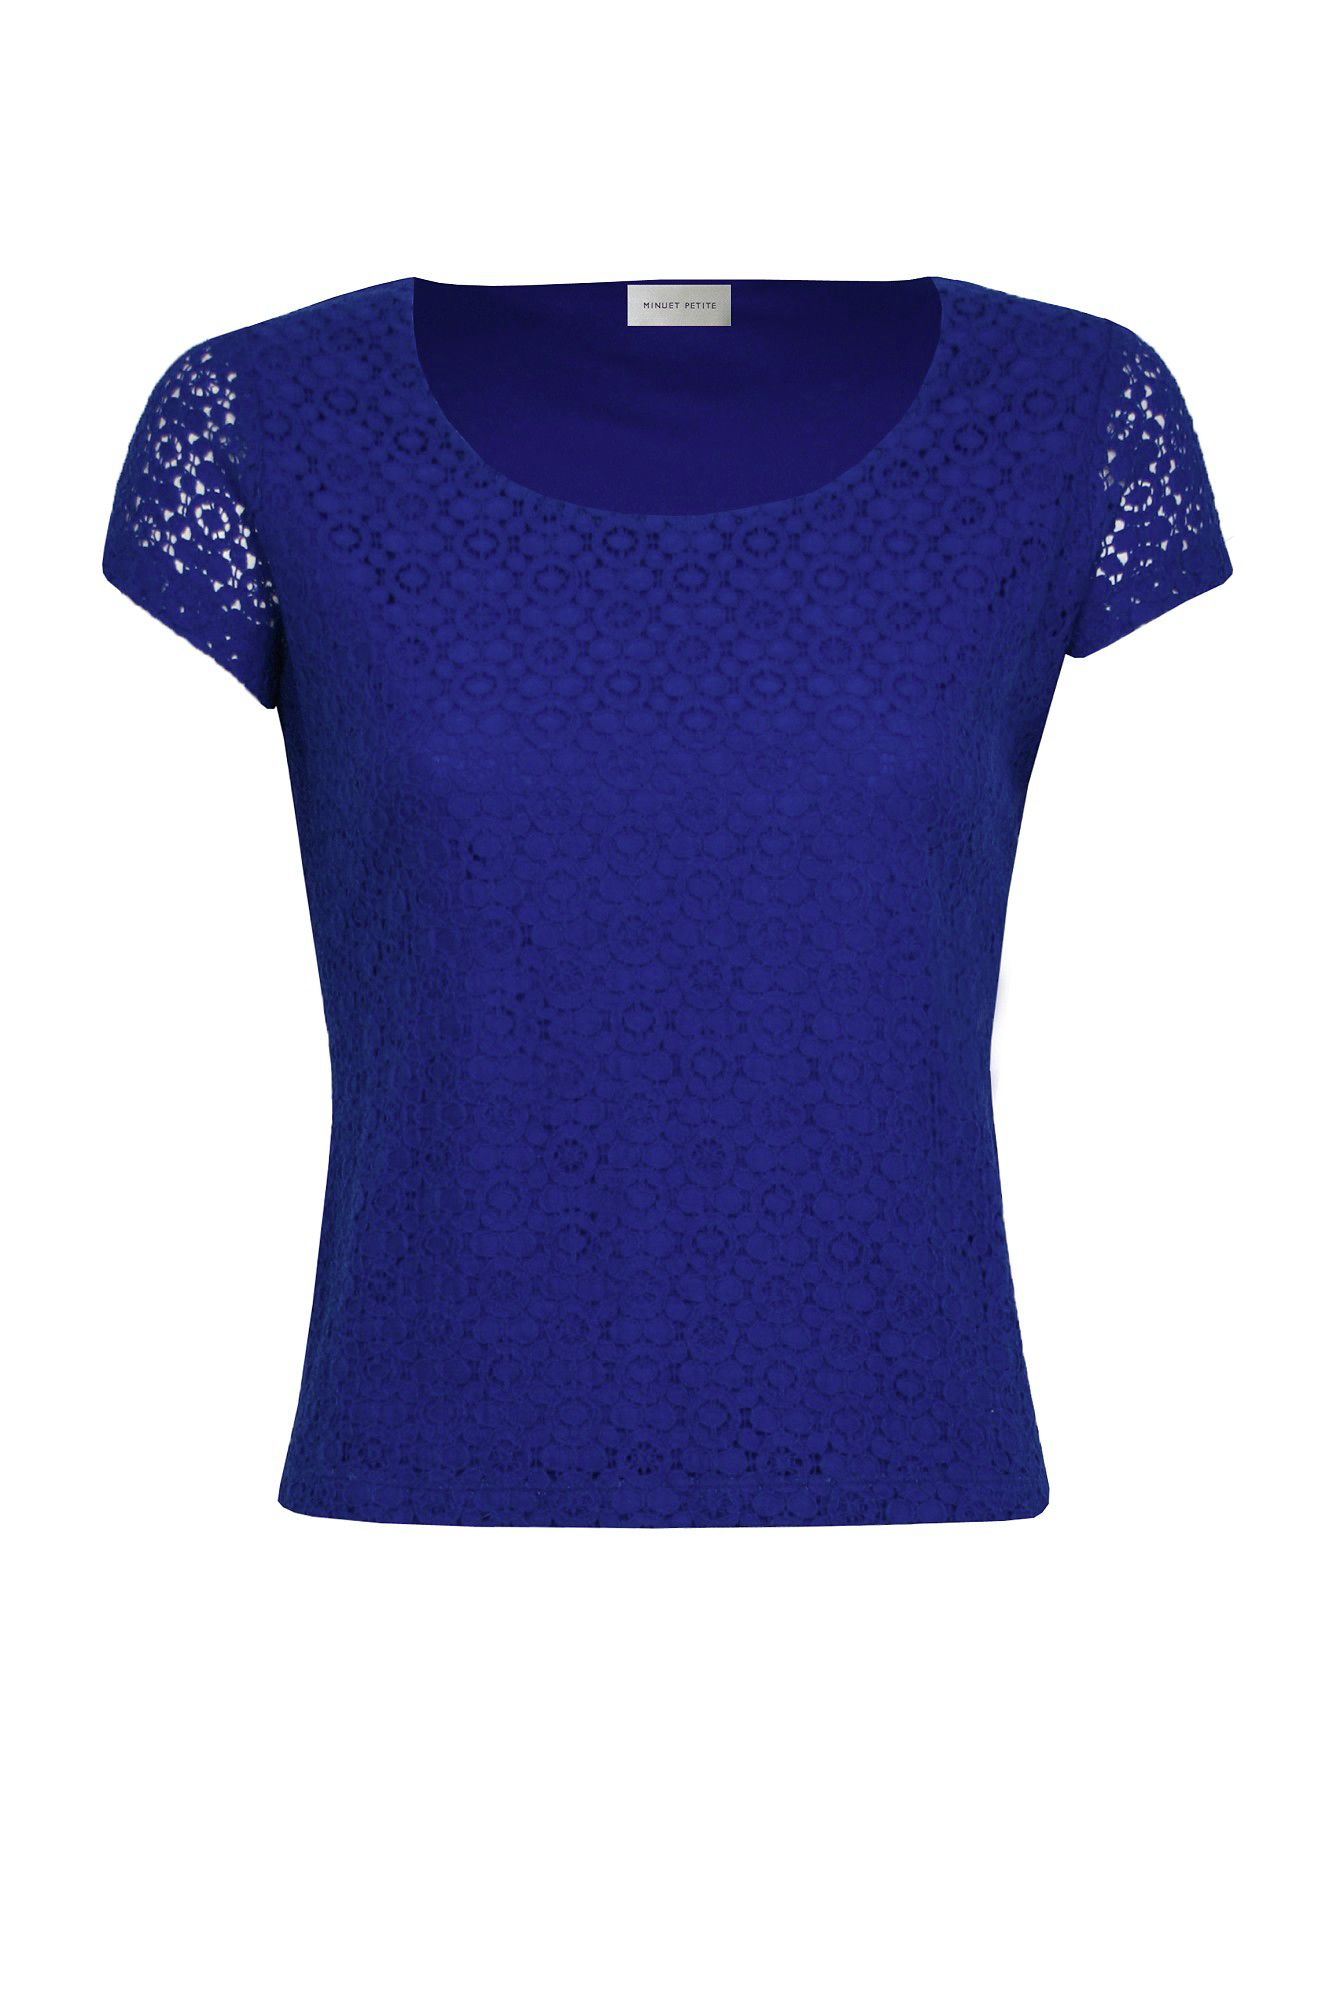 Minuet Petite Lace Textured Top in Blue (royal blue) | Lyst